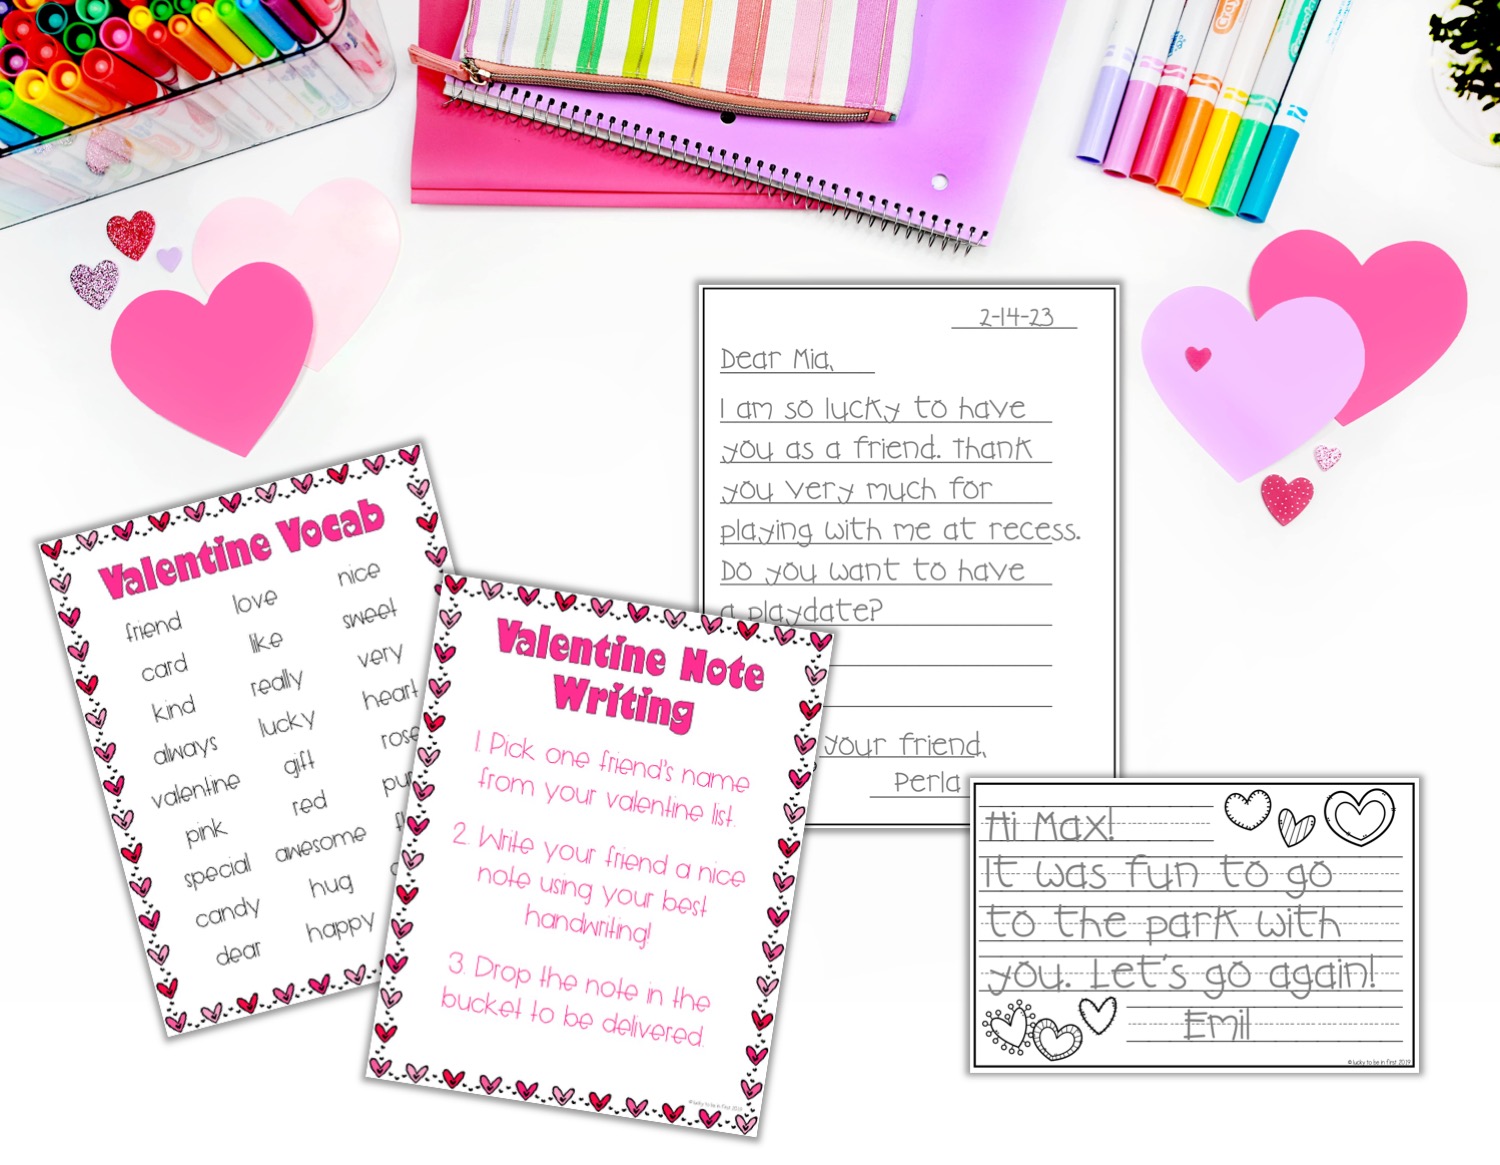 valentine's day card activity to improve handwriting and vocab skills | Lucky Learning with Molly Lynch